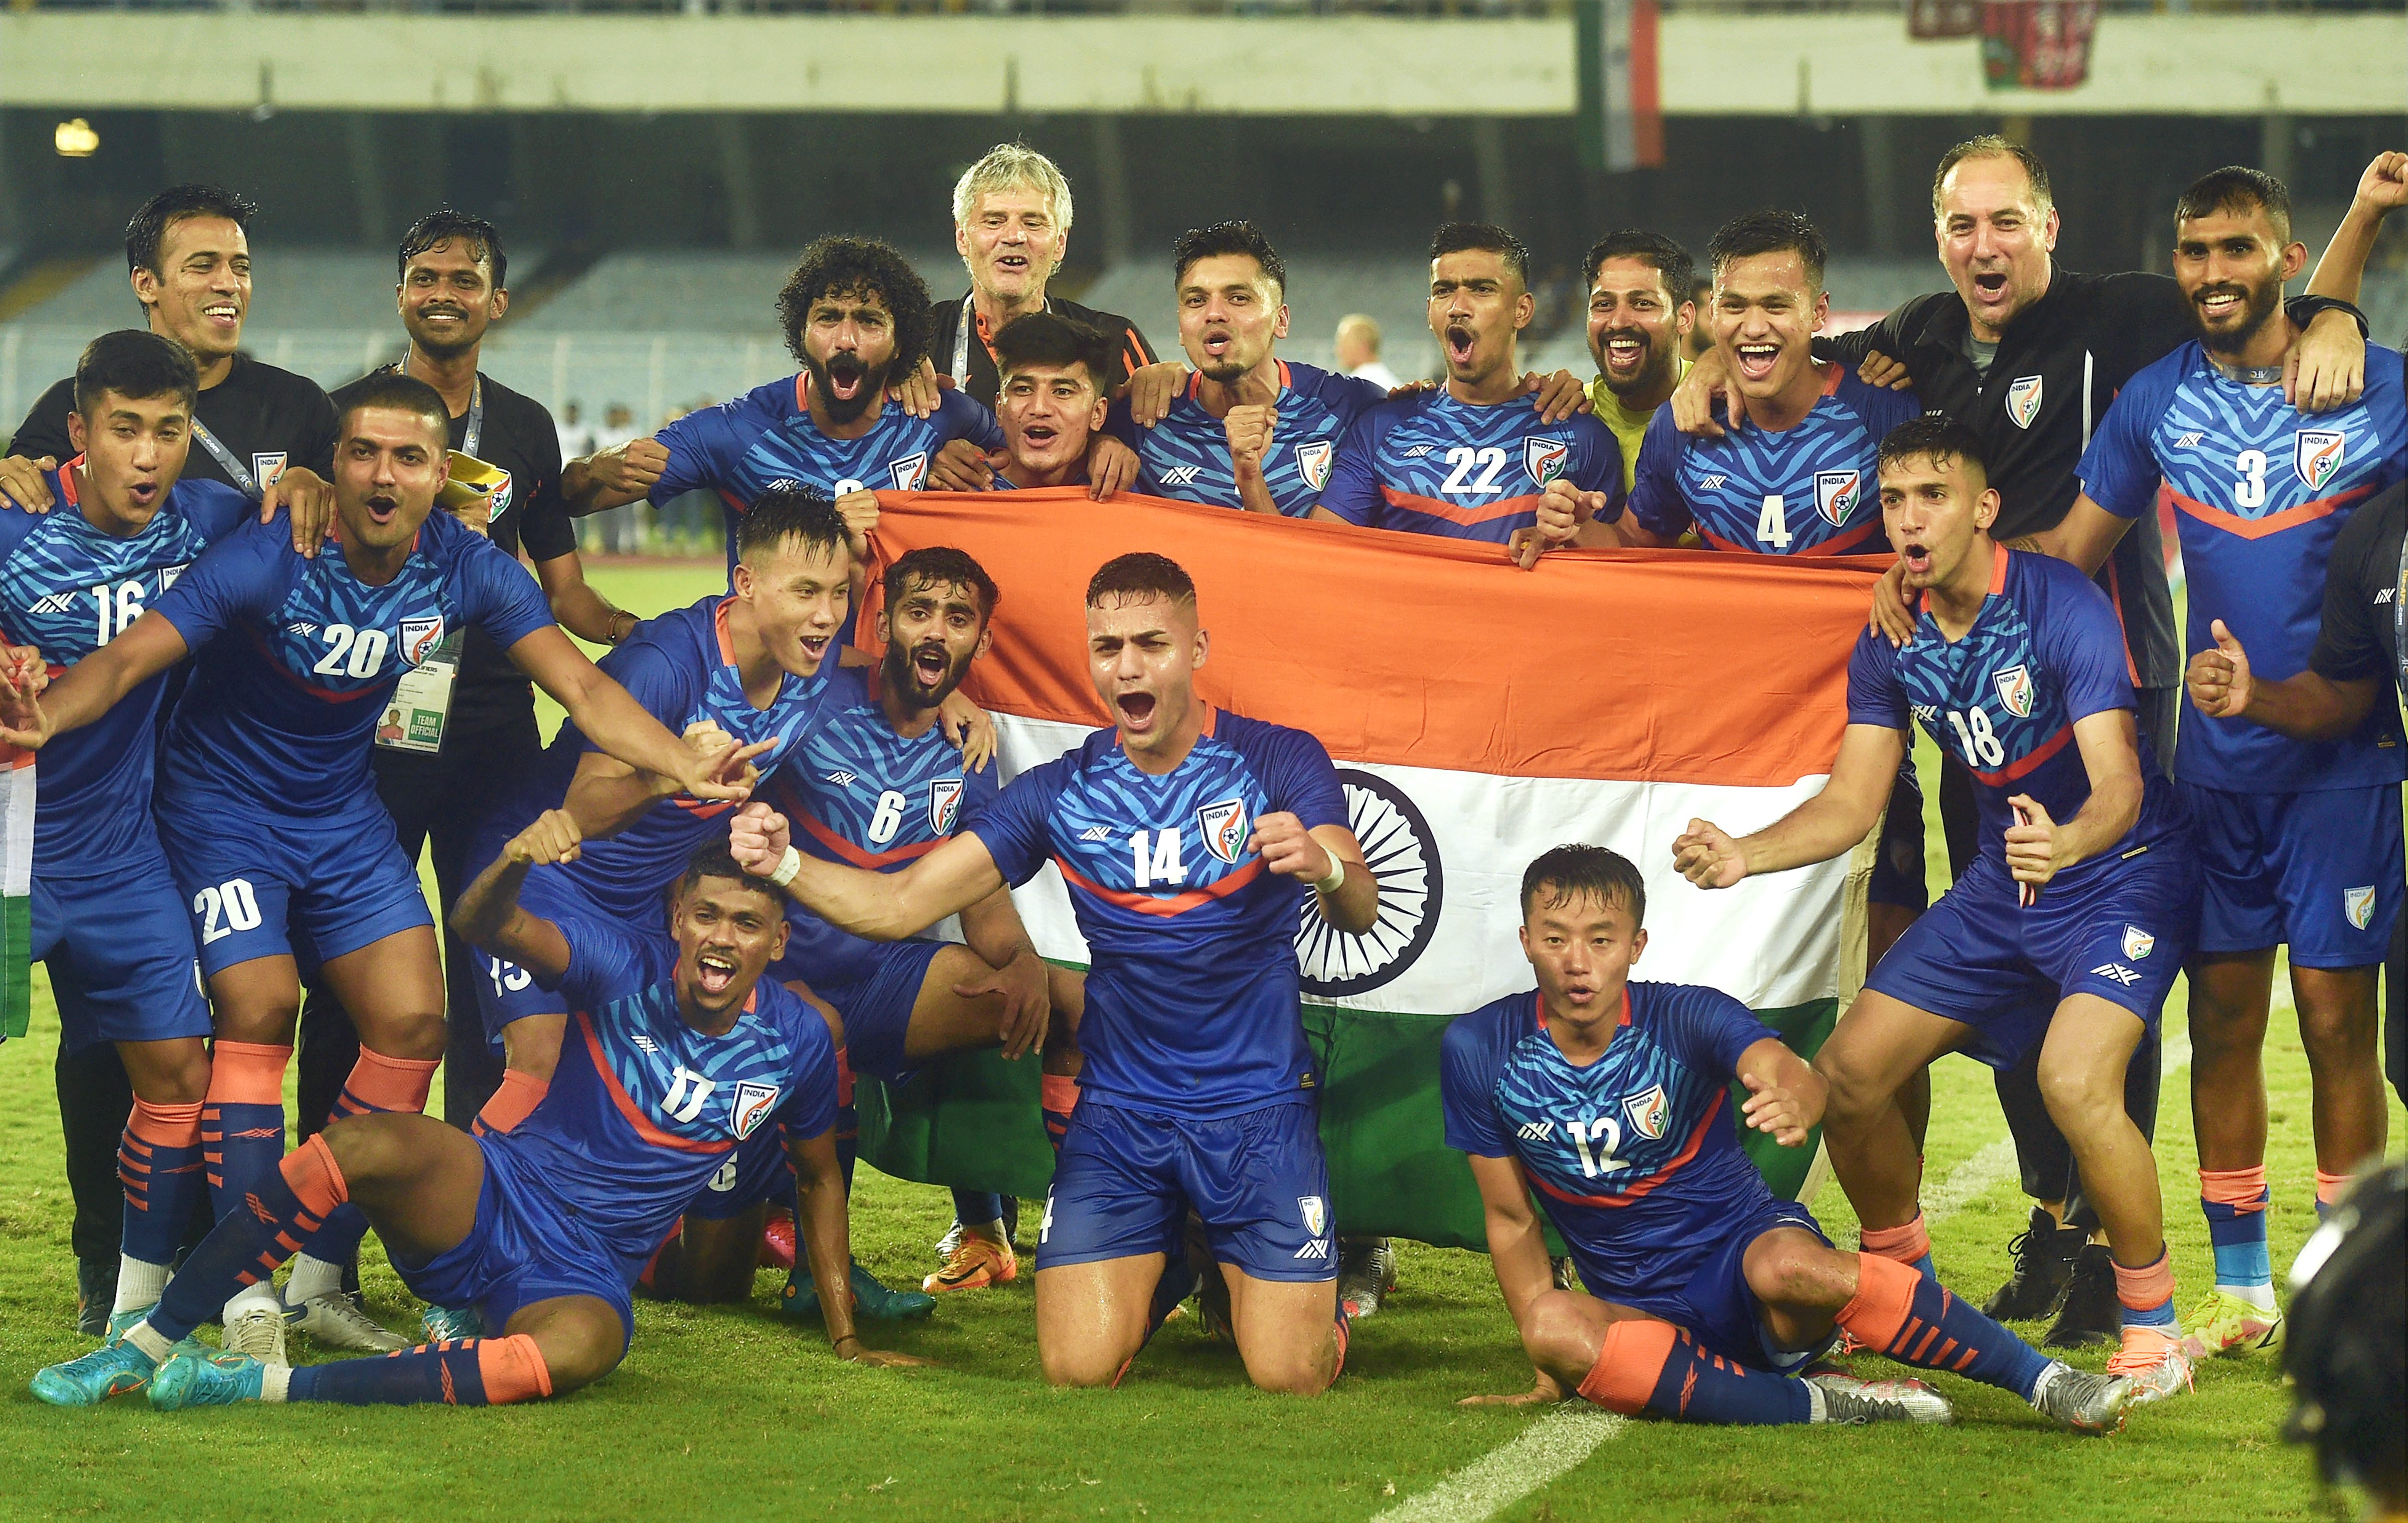 'Truth be told...': Indian football team coach Stimac speaks harsh truths about the state of the sport